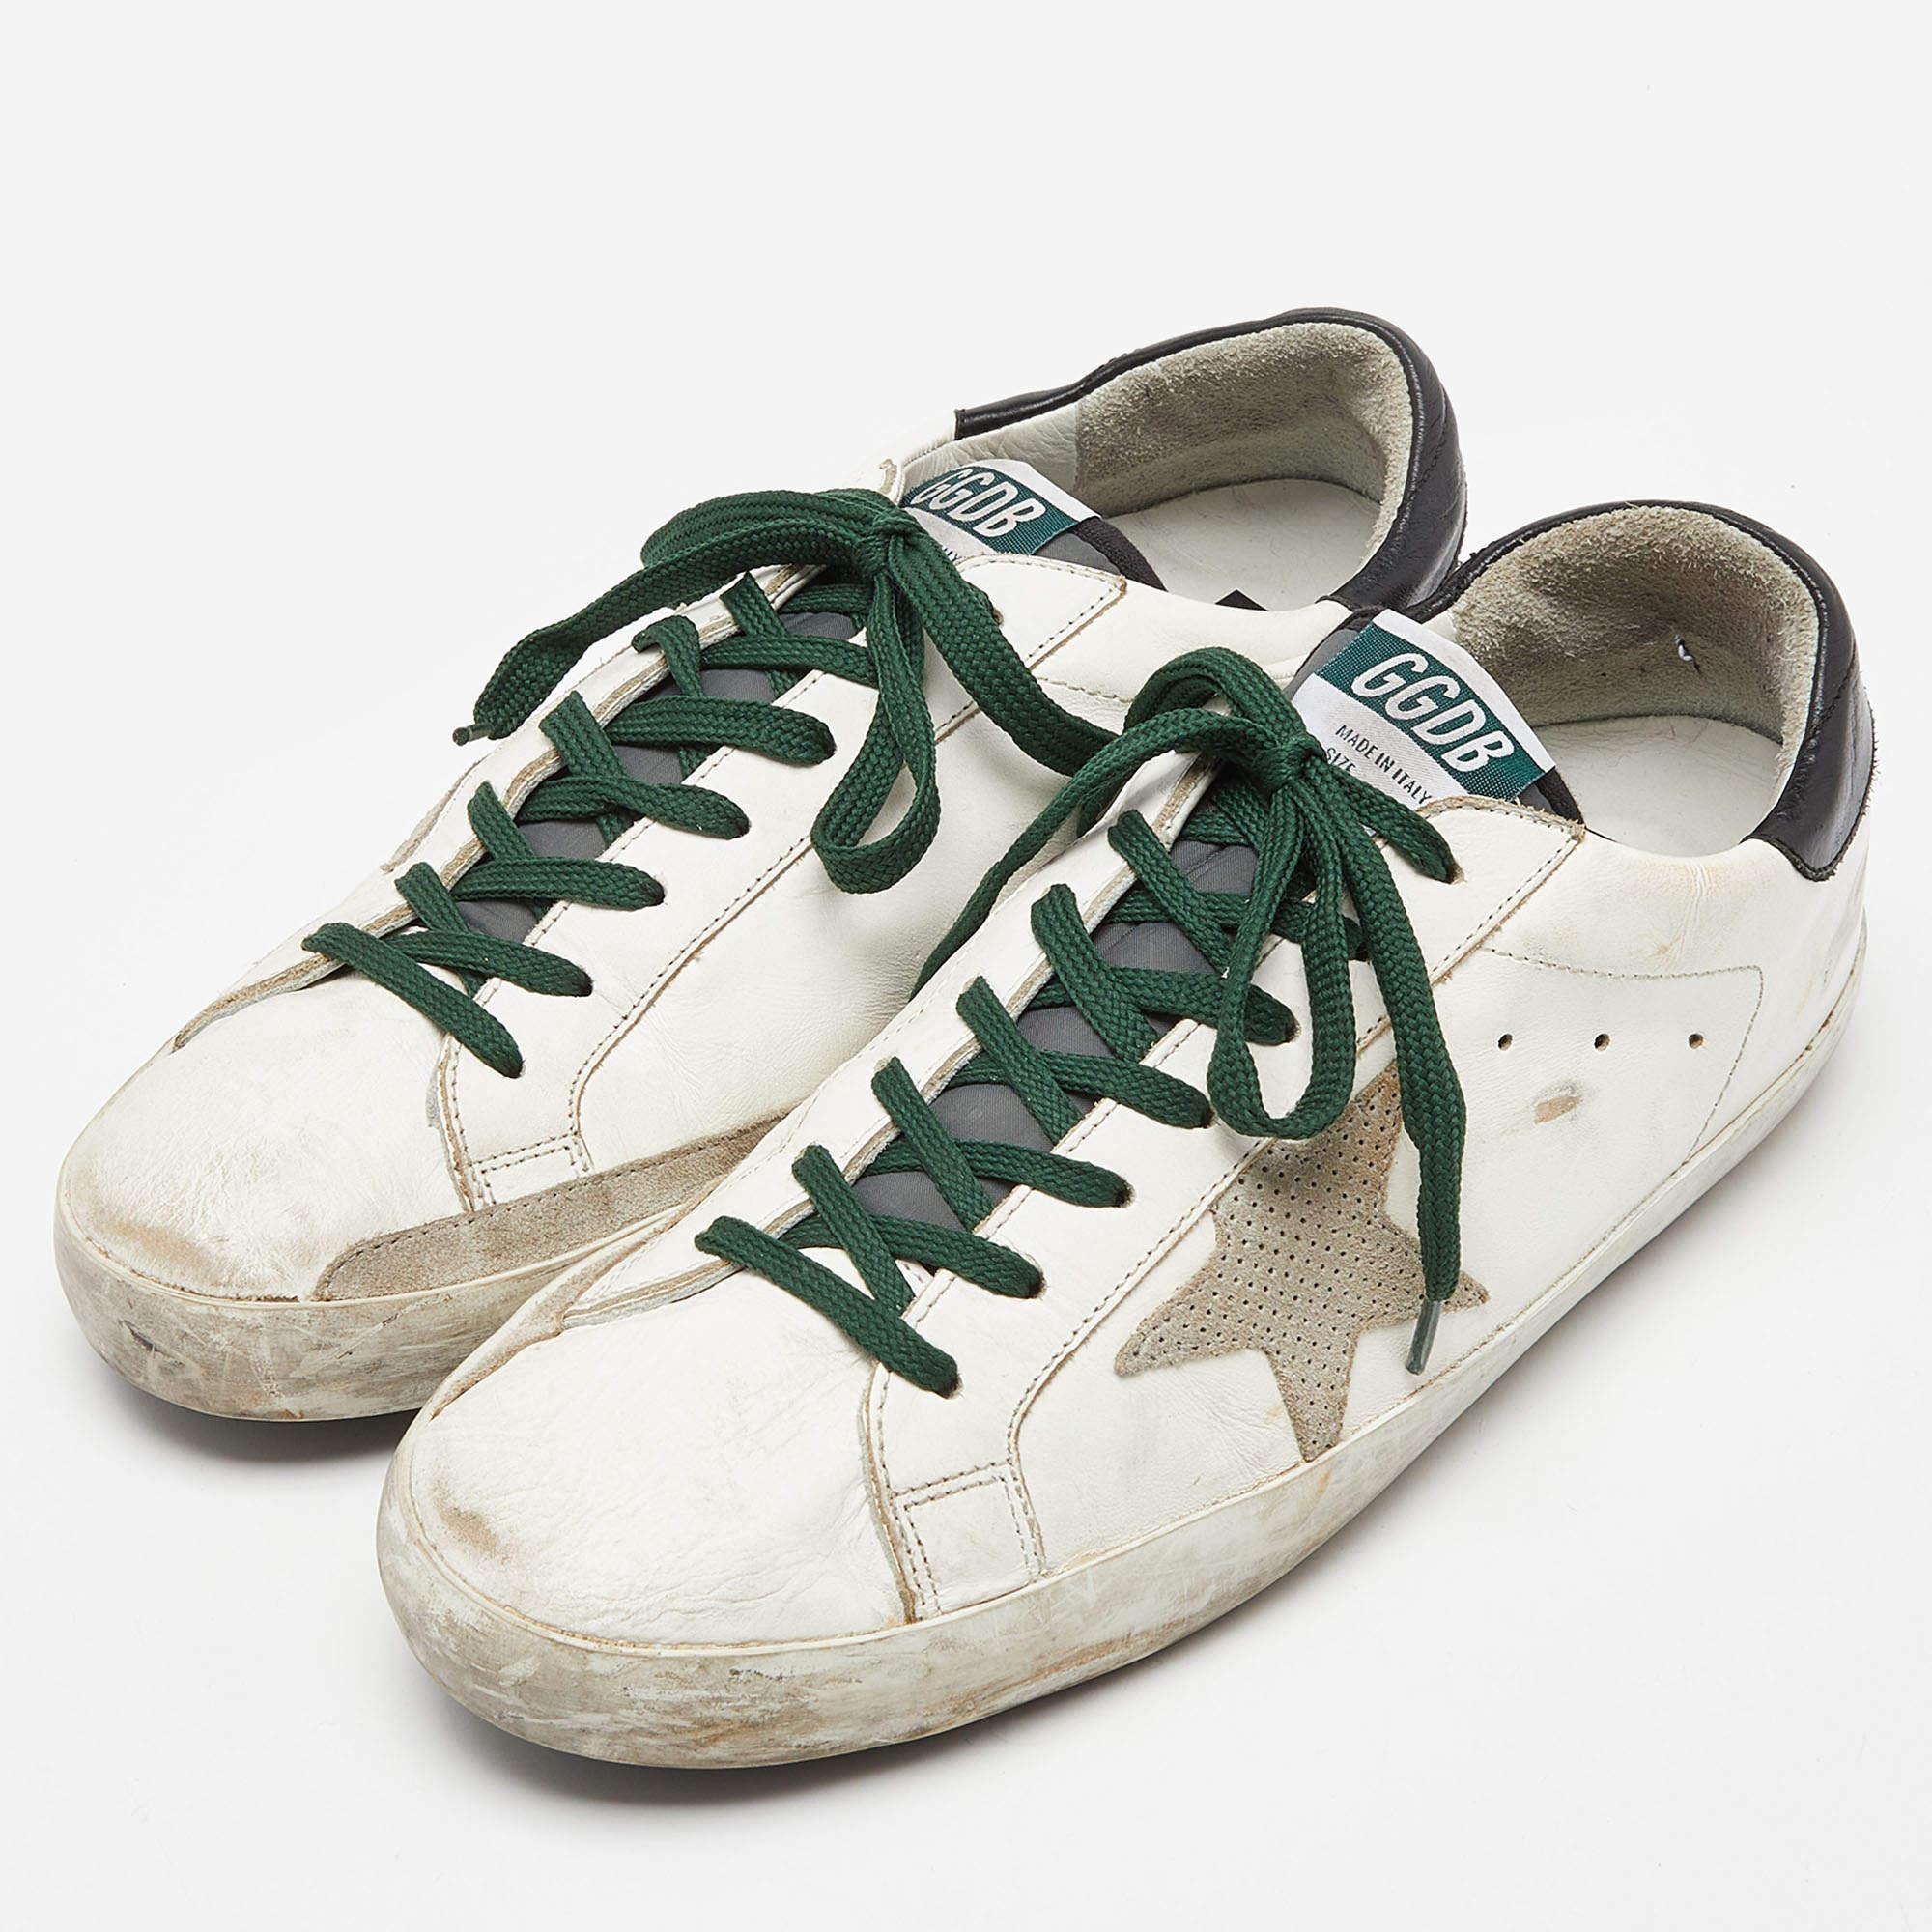 Golden Goose White Leather And Grey Suede Hi Star Sneakers Size 43 4